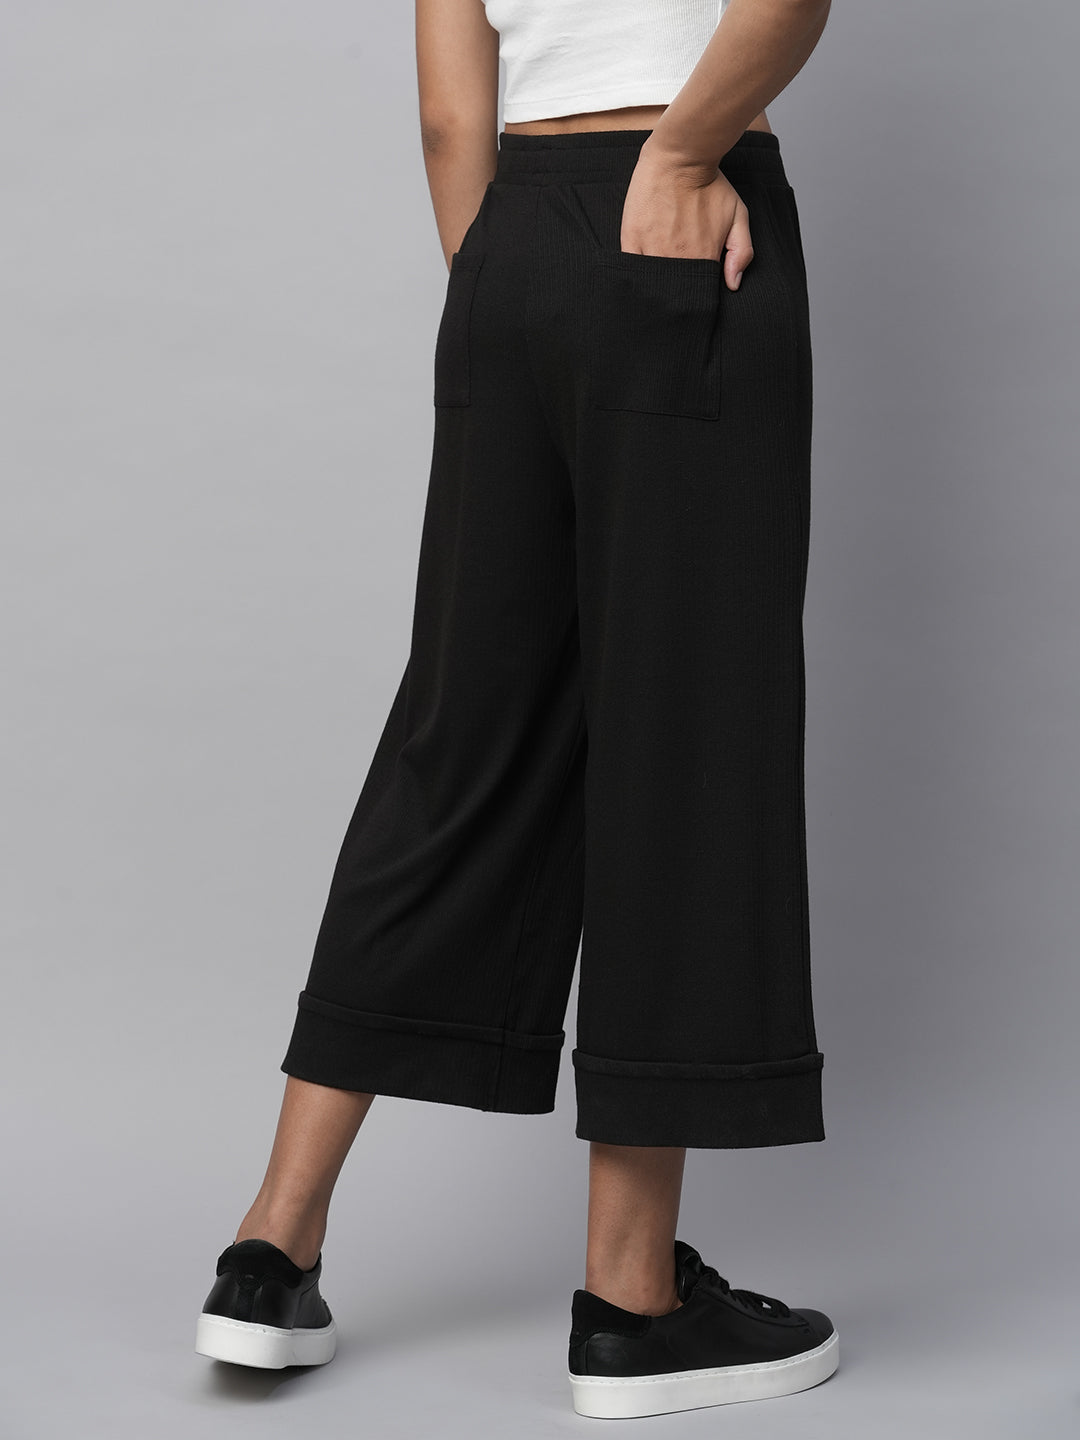 Ribbed Knit Wide Leg Cropped Lounge Pants With A Cuffed Hemline